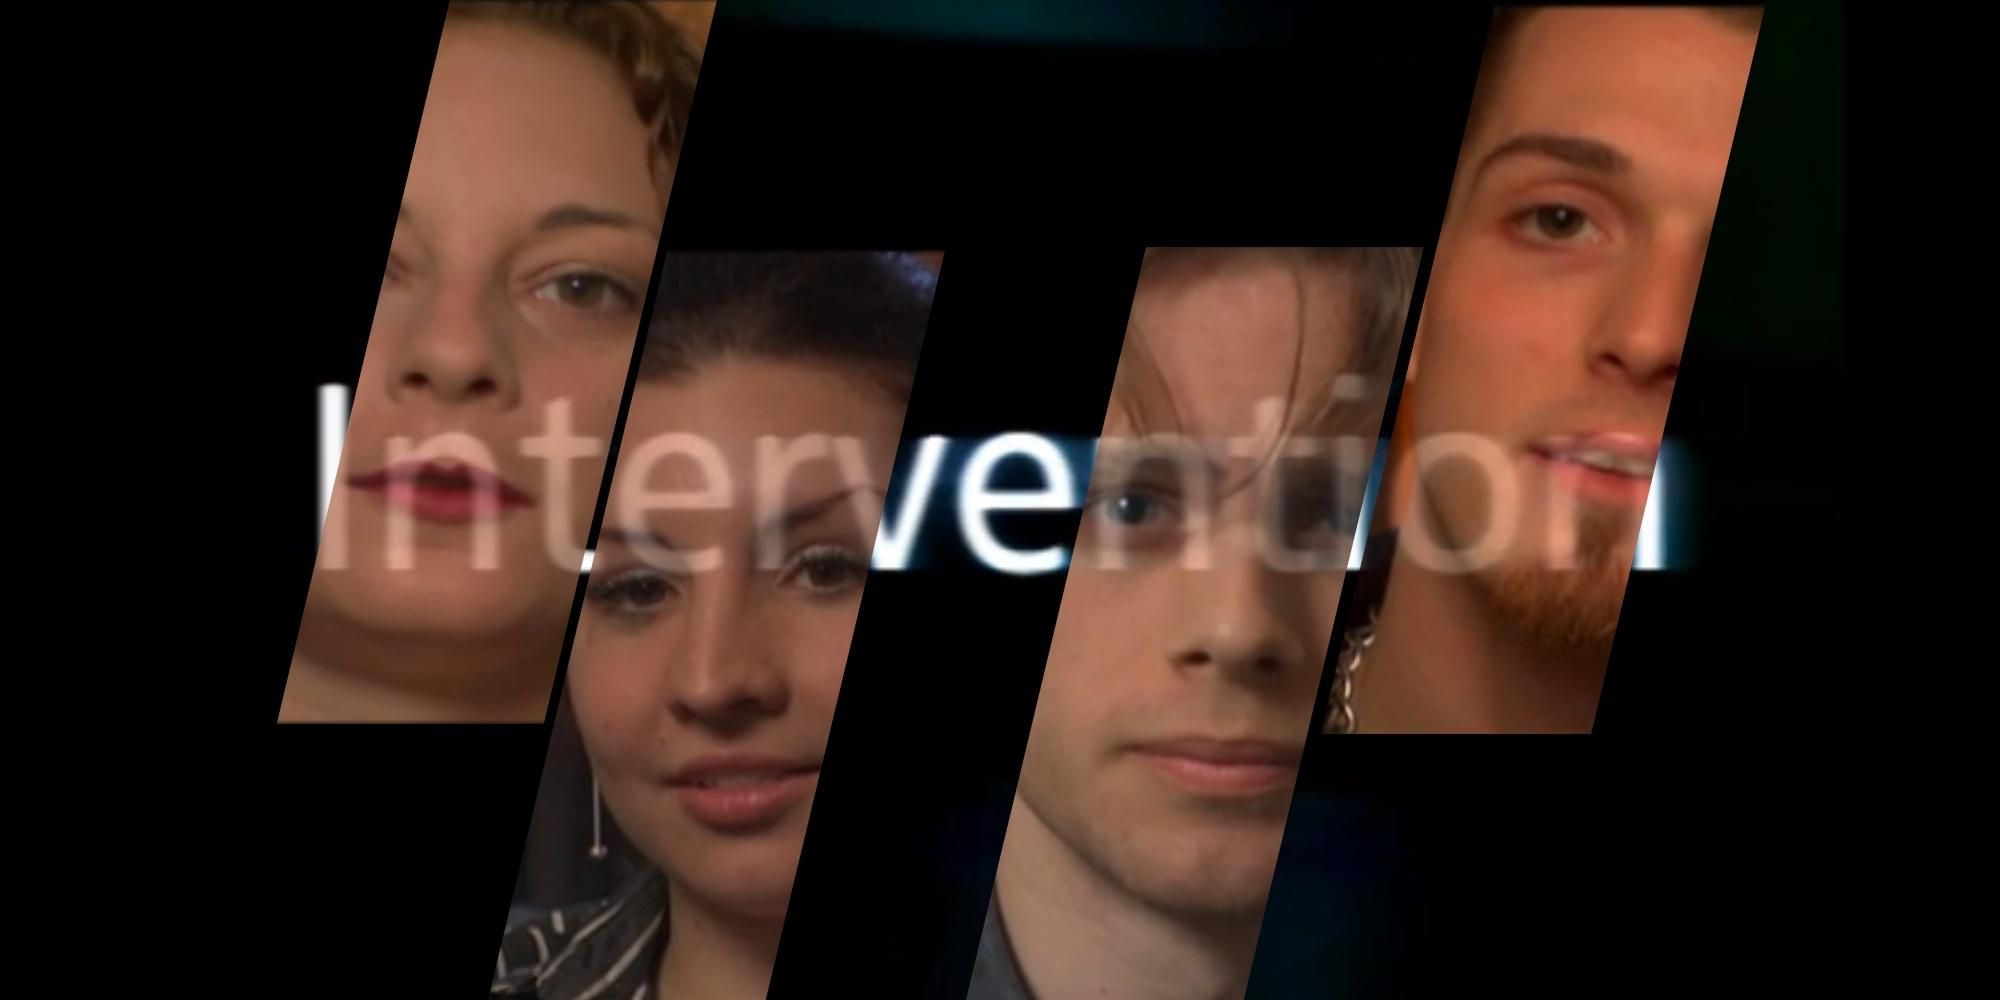 intervention montage with show title and black background